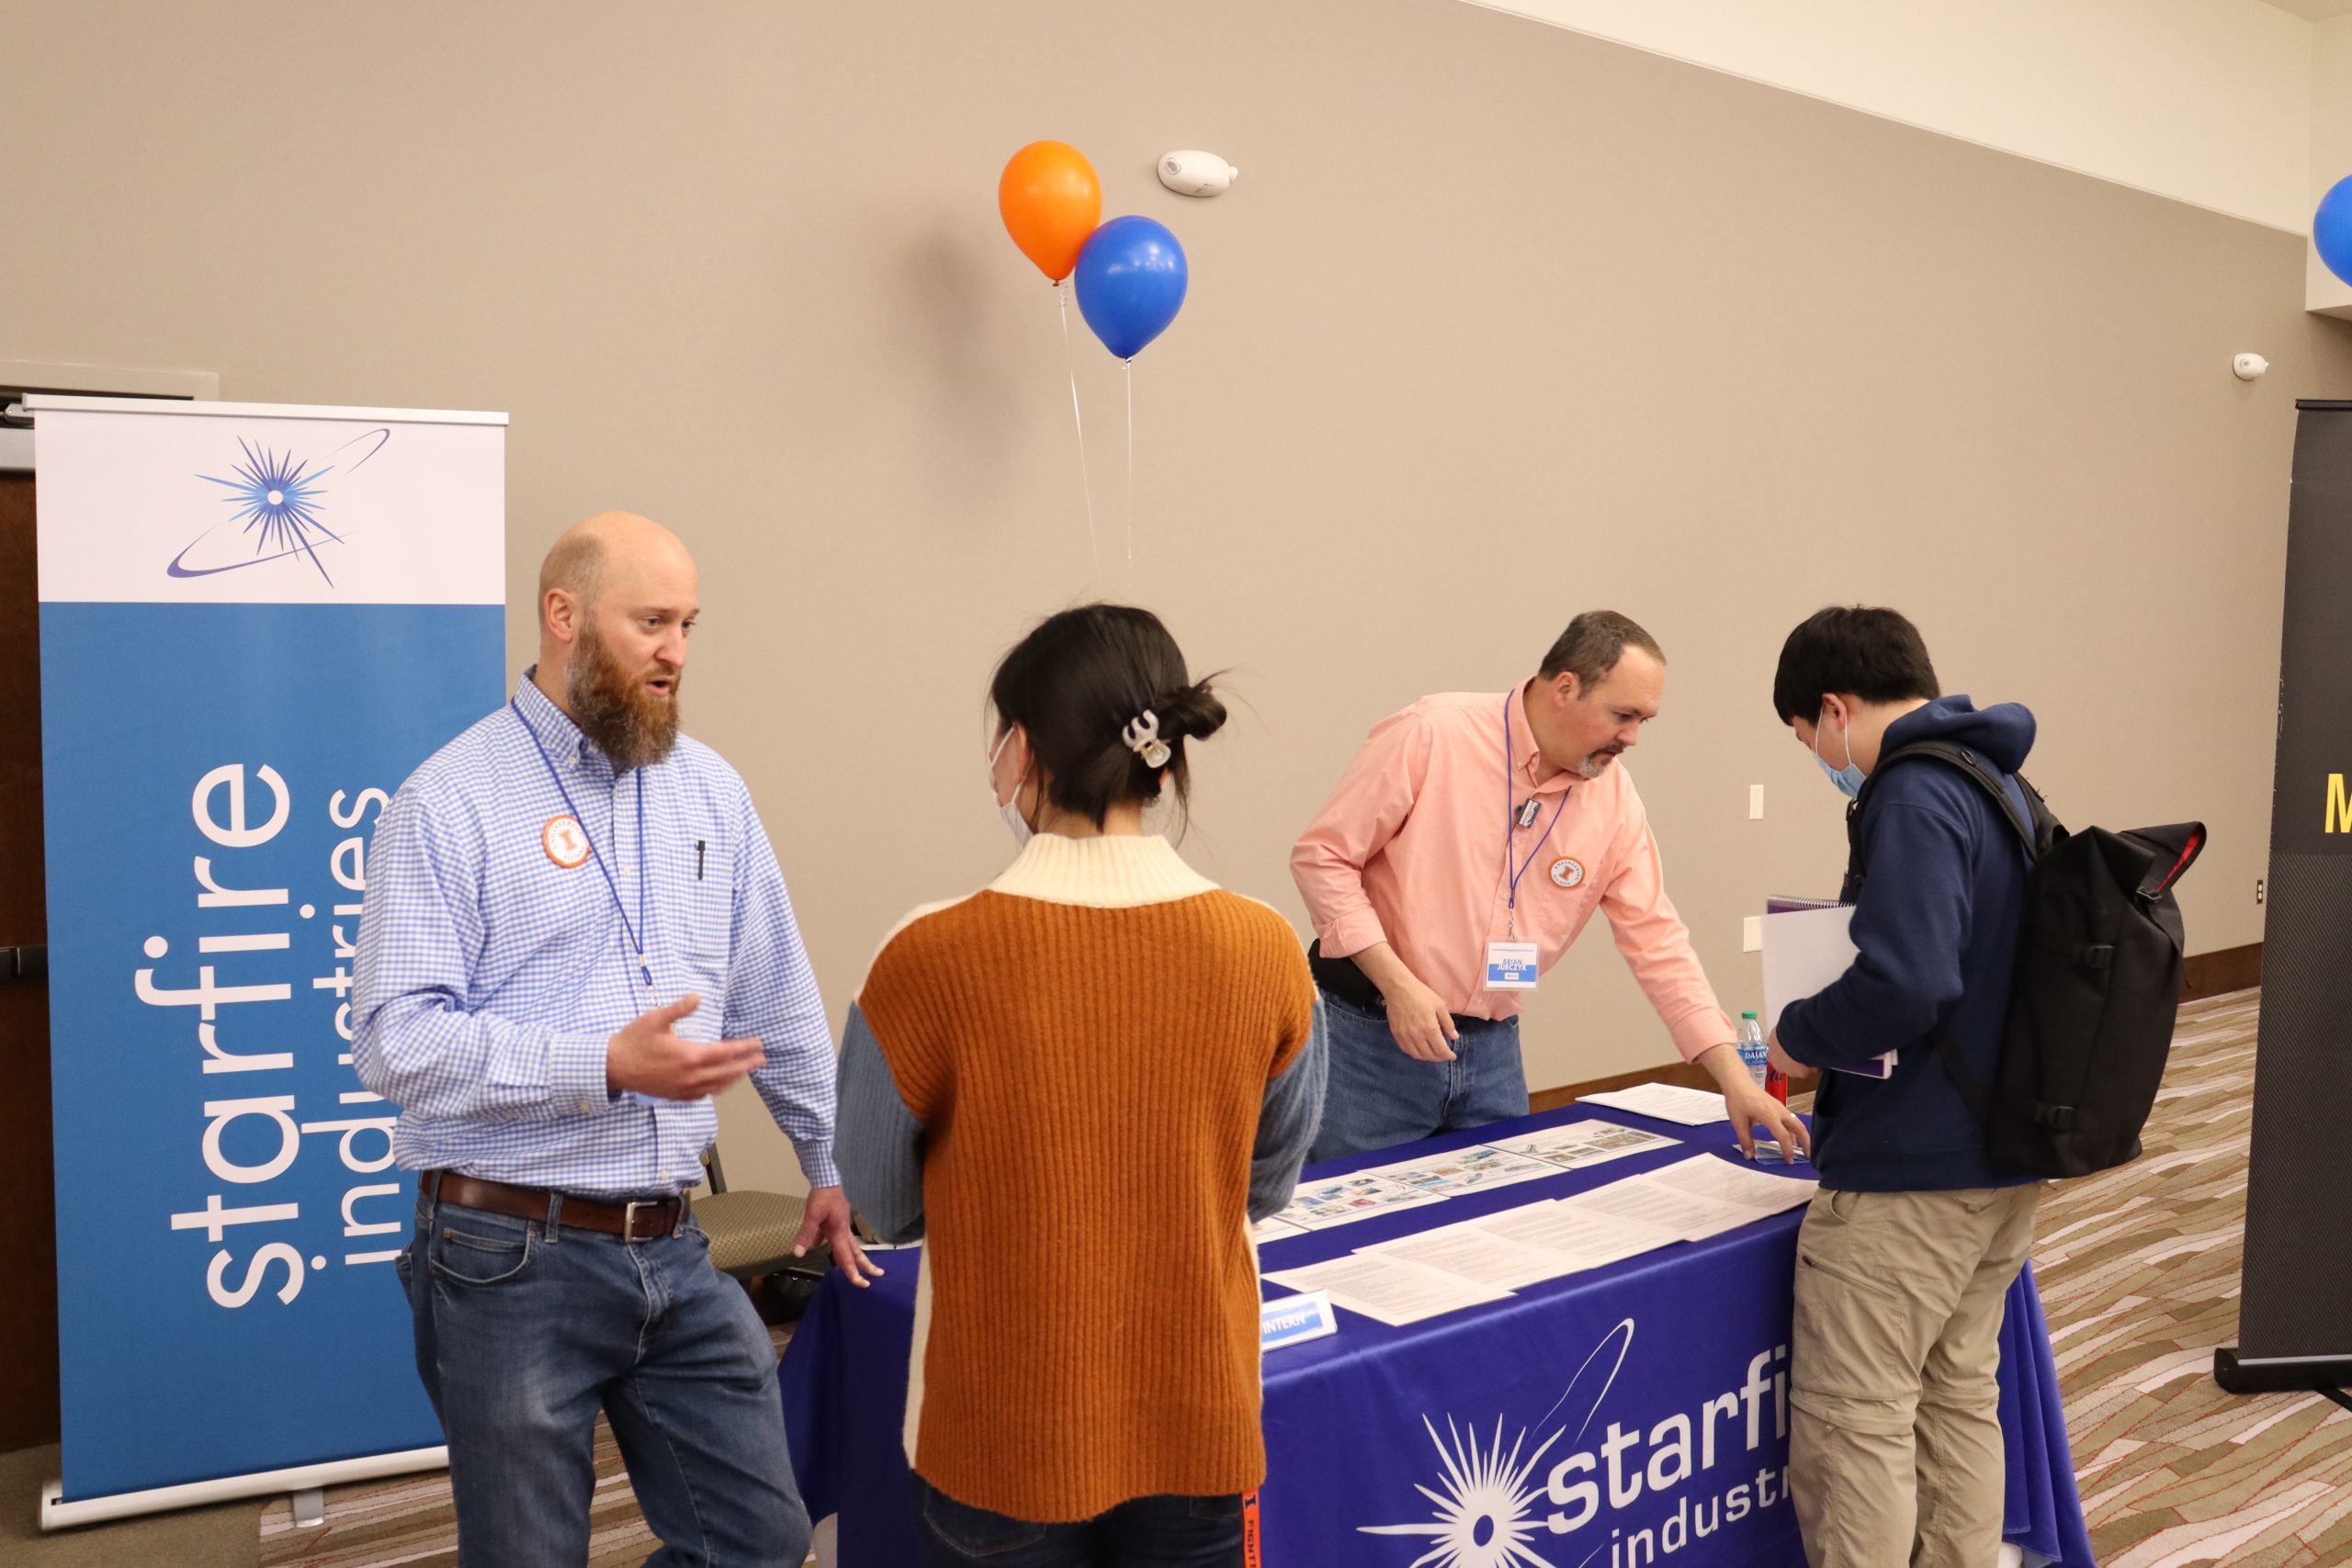 Starfire booth at the Research Park Career Fair.